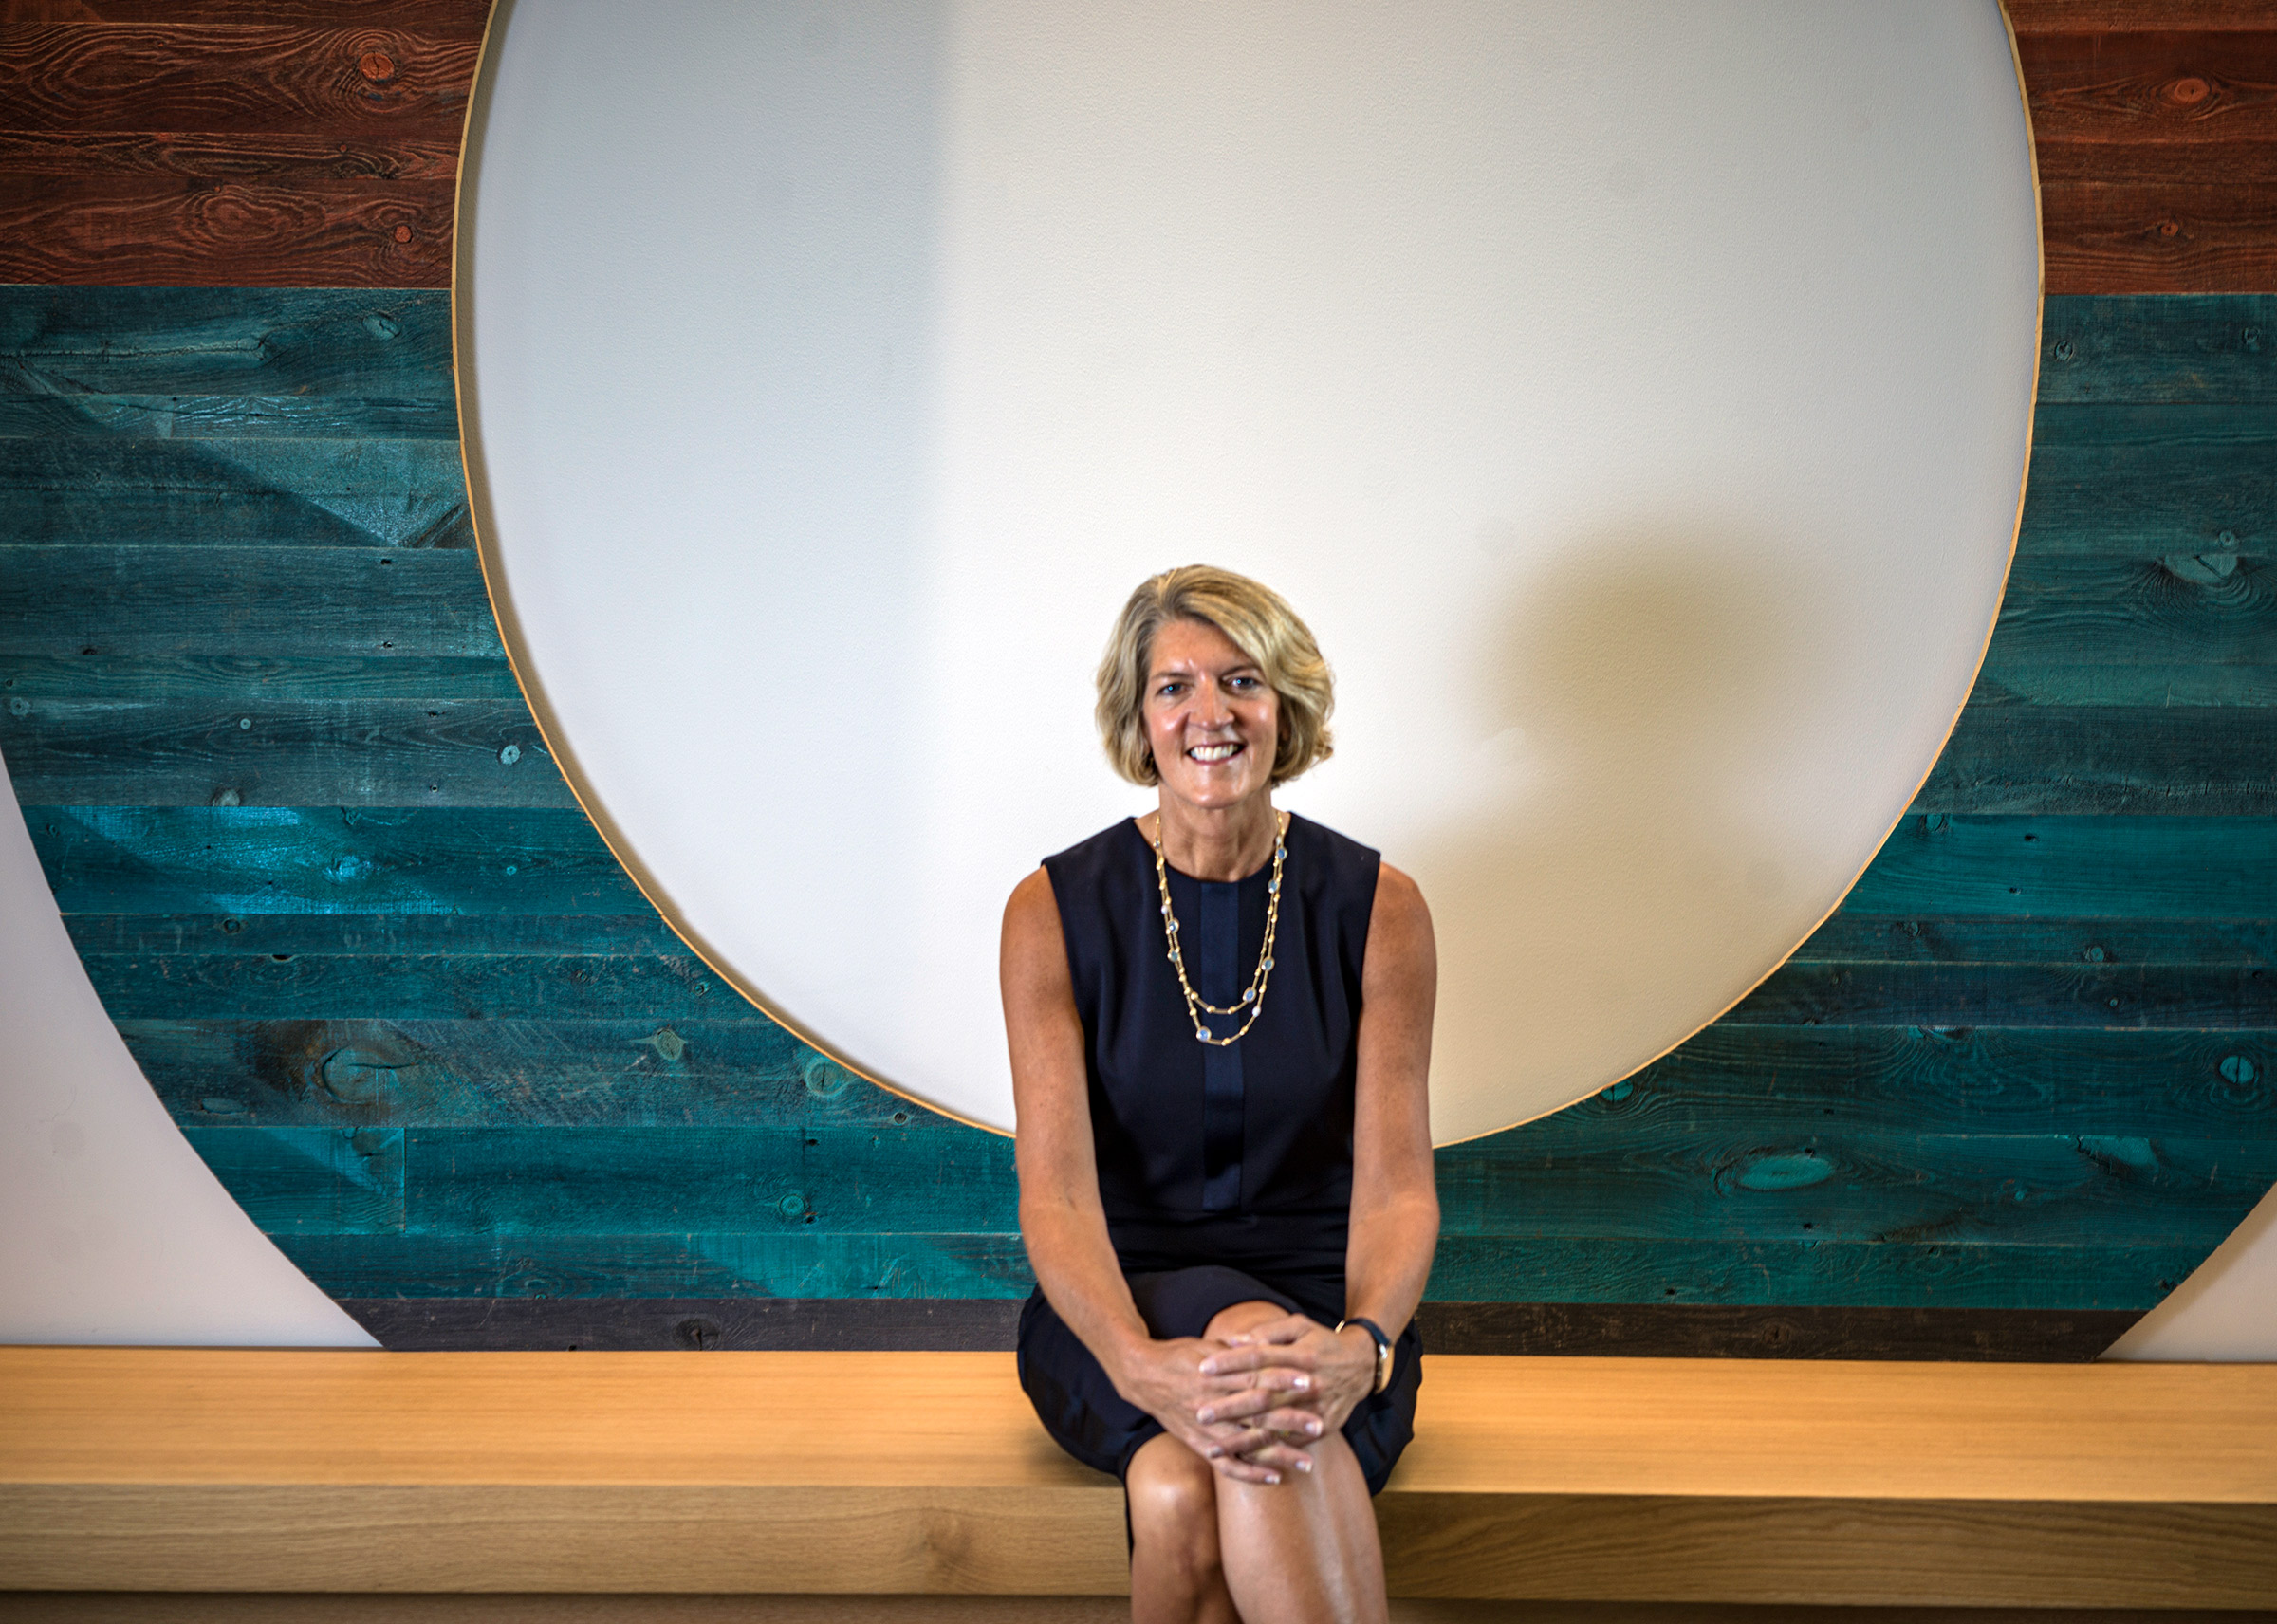 Land O’Lakes CEO Beth Ford photographed in the company's headquarters in Arden Hills, Minn., July 29, 2021. Ford leads the company as it celebrates it's 100th anniversary as a business in 2021. (Richard Tsong-Taatarii—Star Tribune/Getty Images)